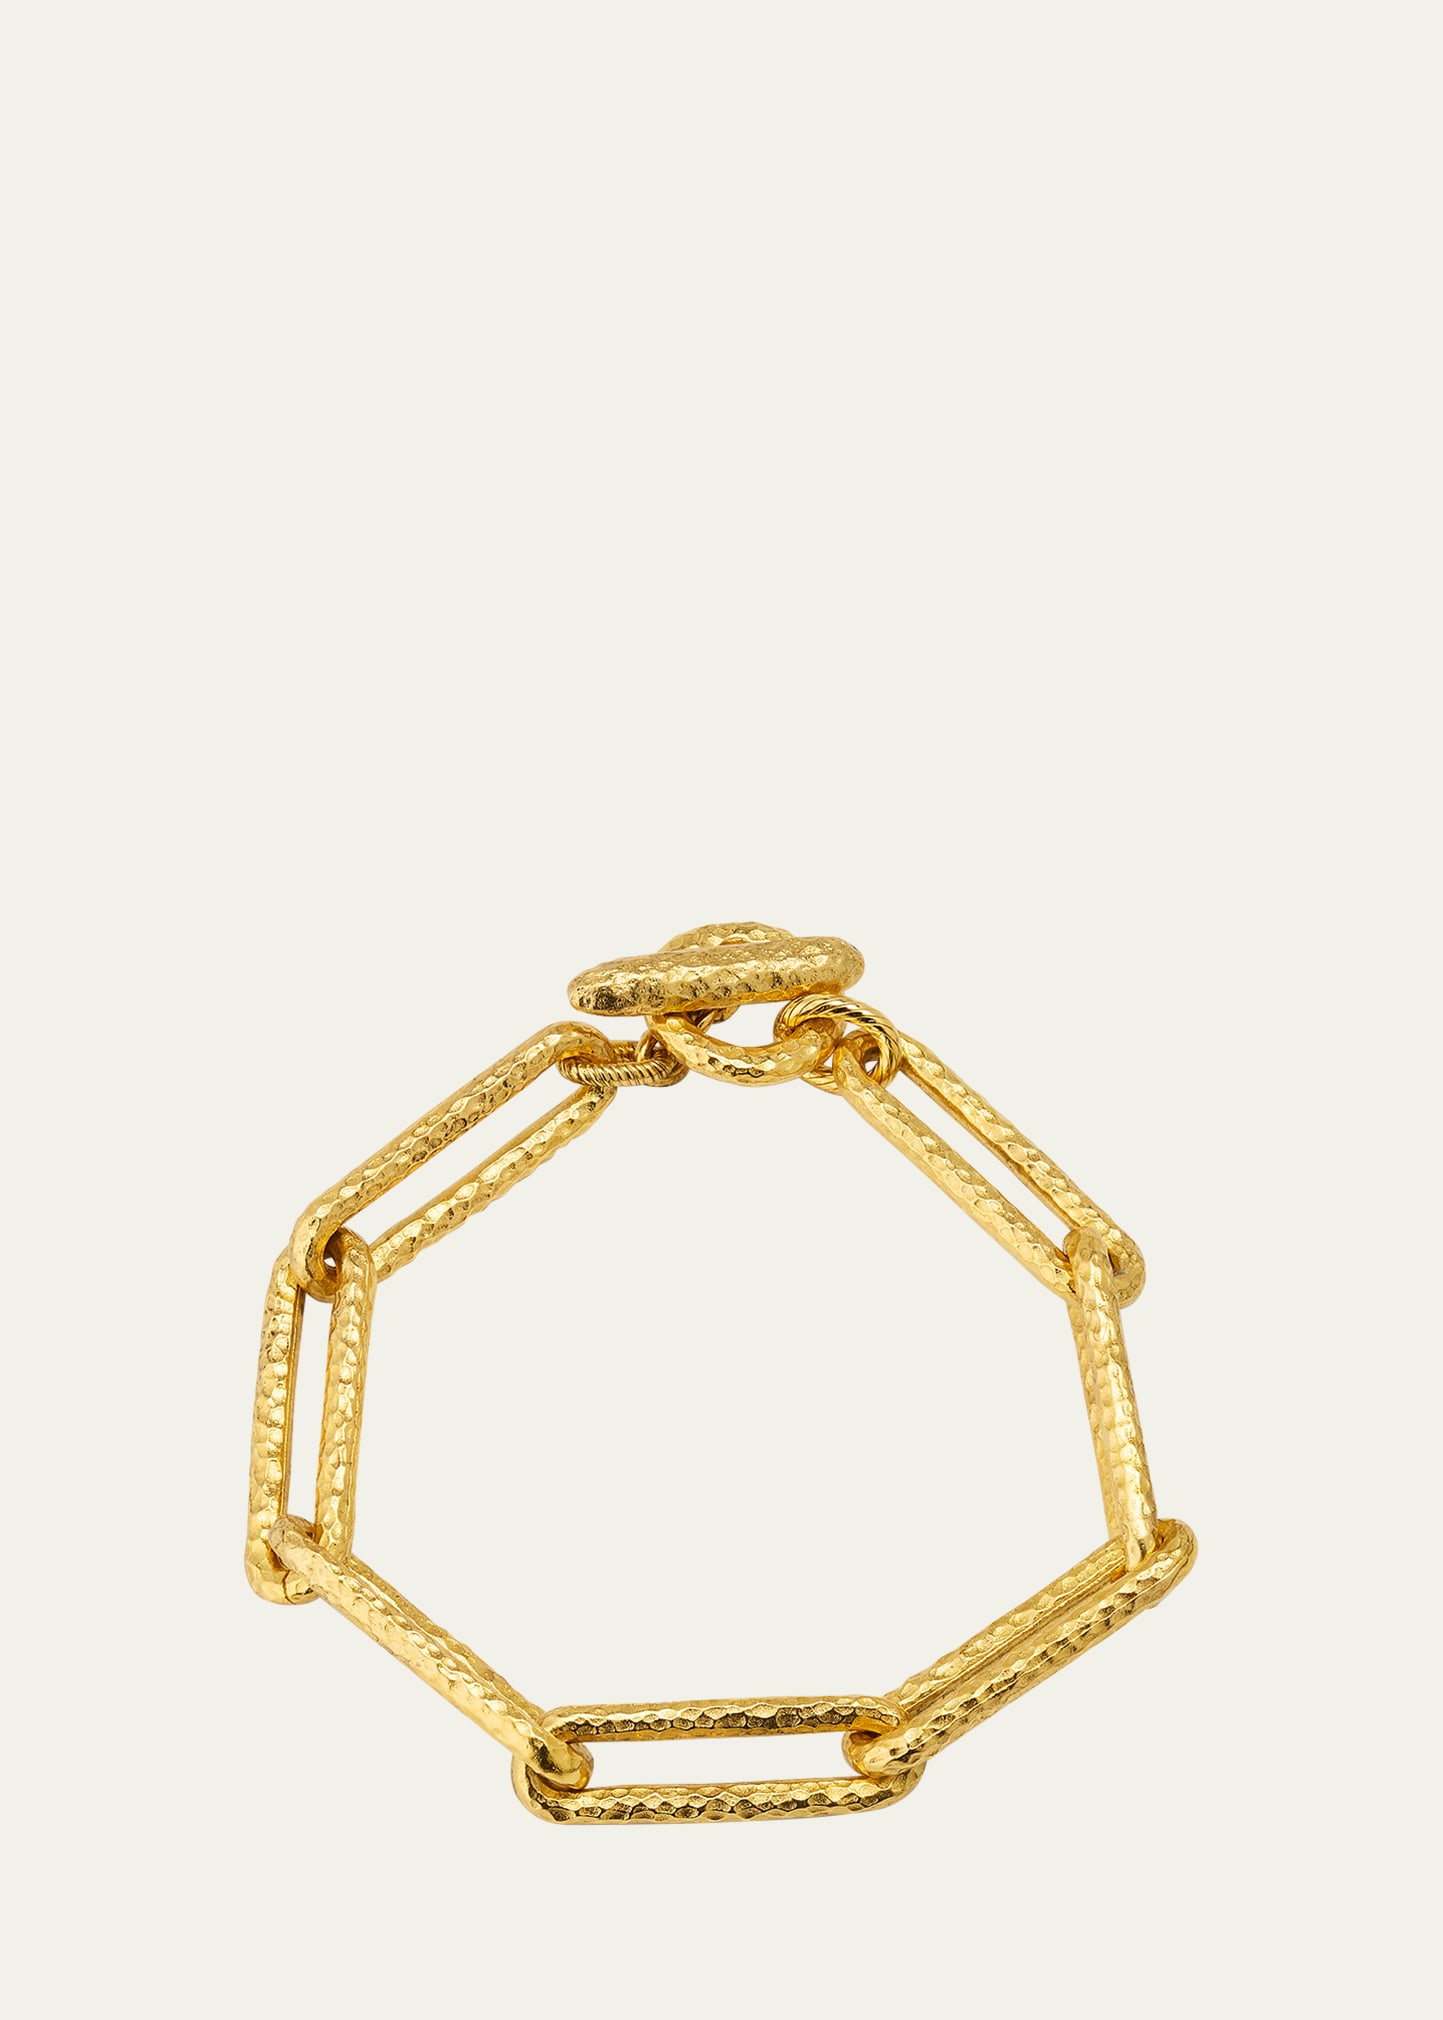 Ben-amun 24k Hammered Yellow Gold Cable Chain Bracelet In Yg